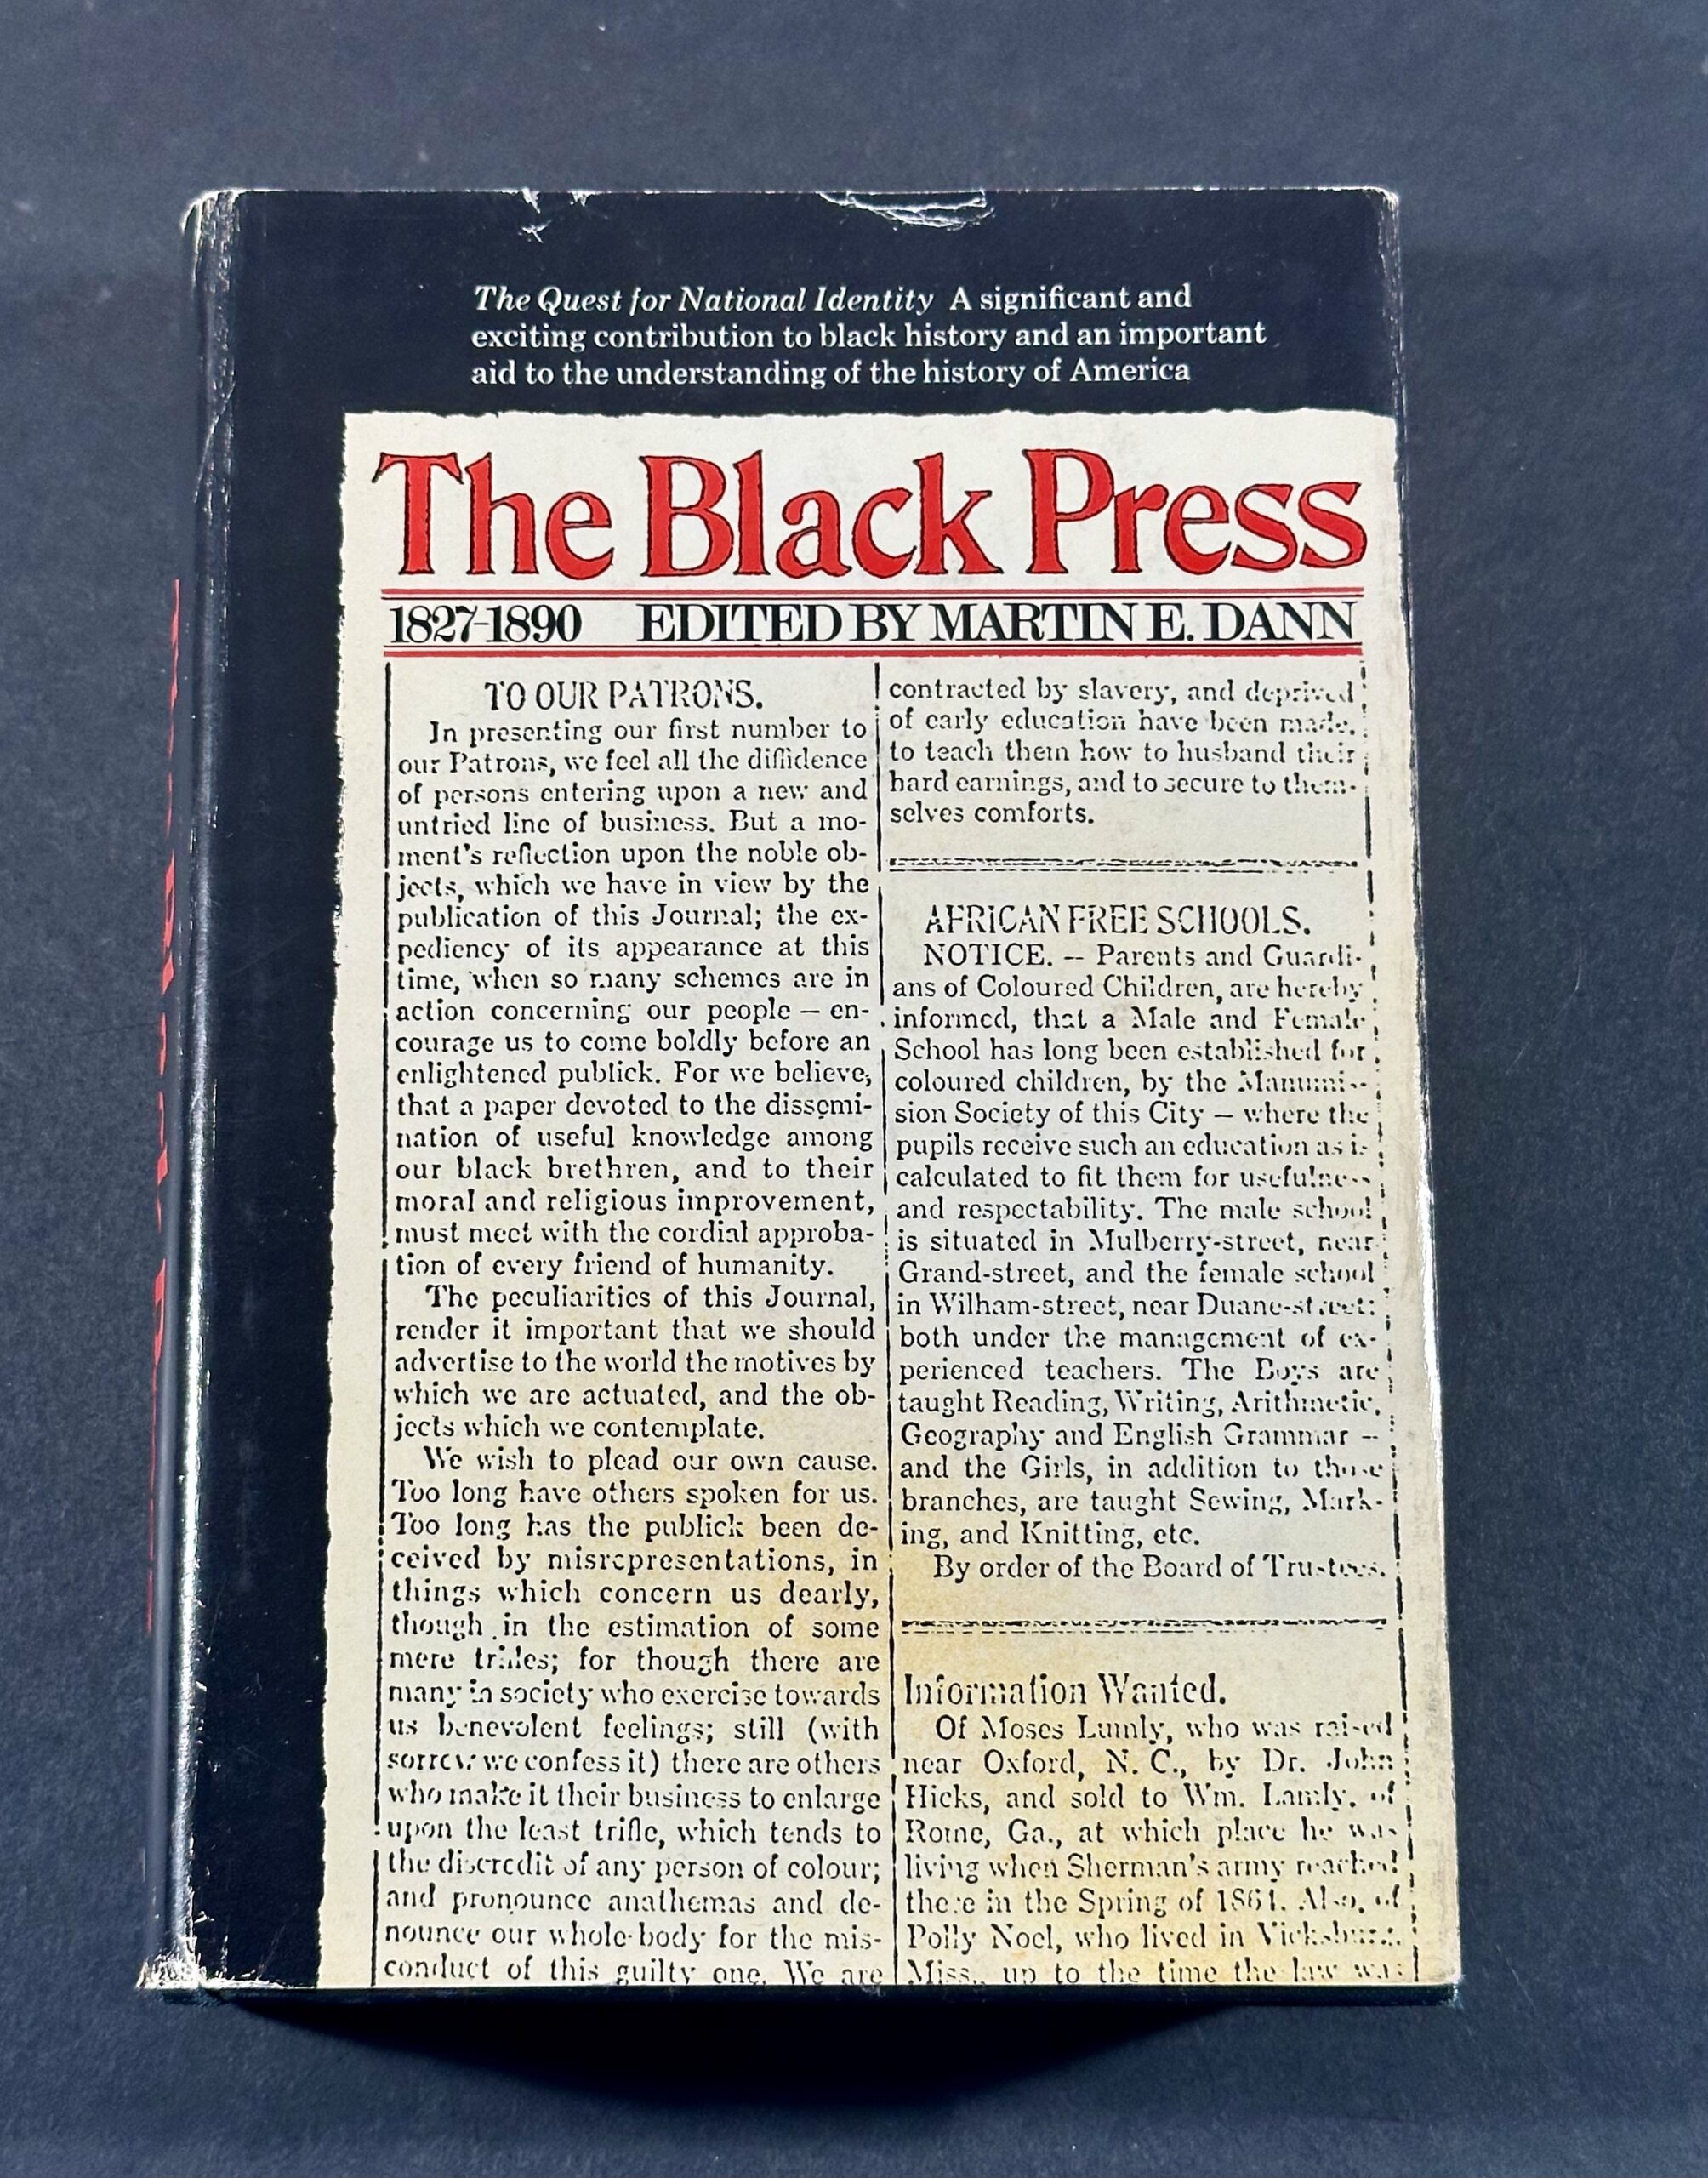 Dann, Martin E. The Black Press, 1827-1890: The Quest for National Identity, [1971], from the Library Annex-Special Collections Use Only